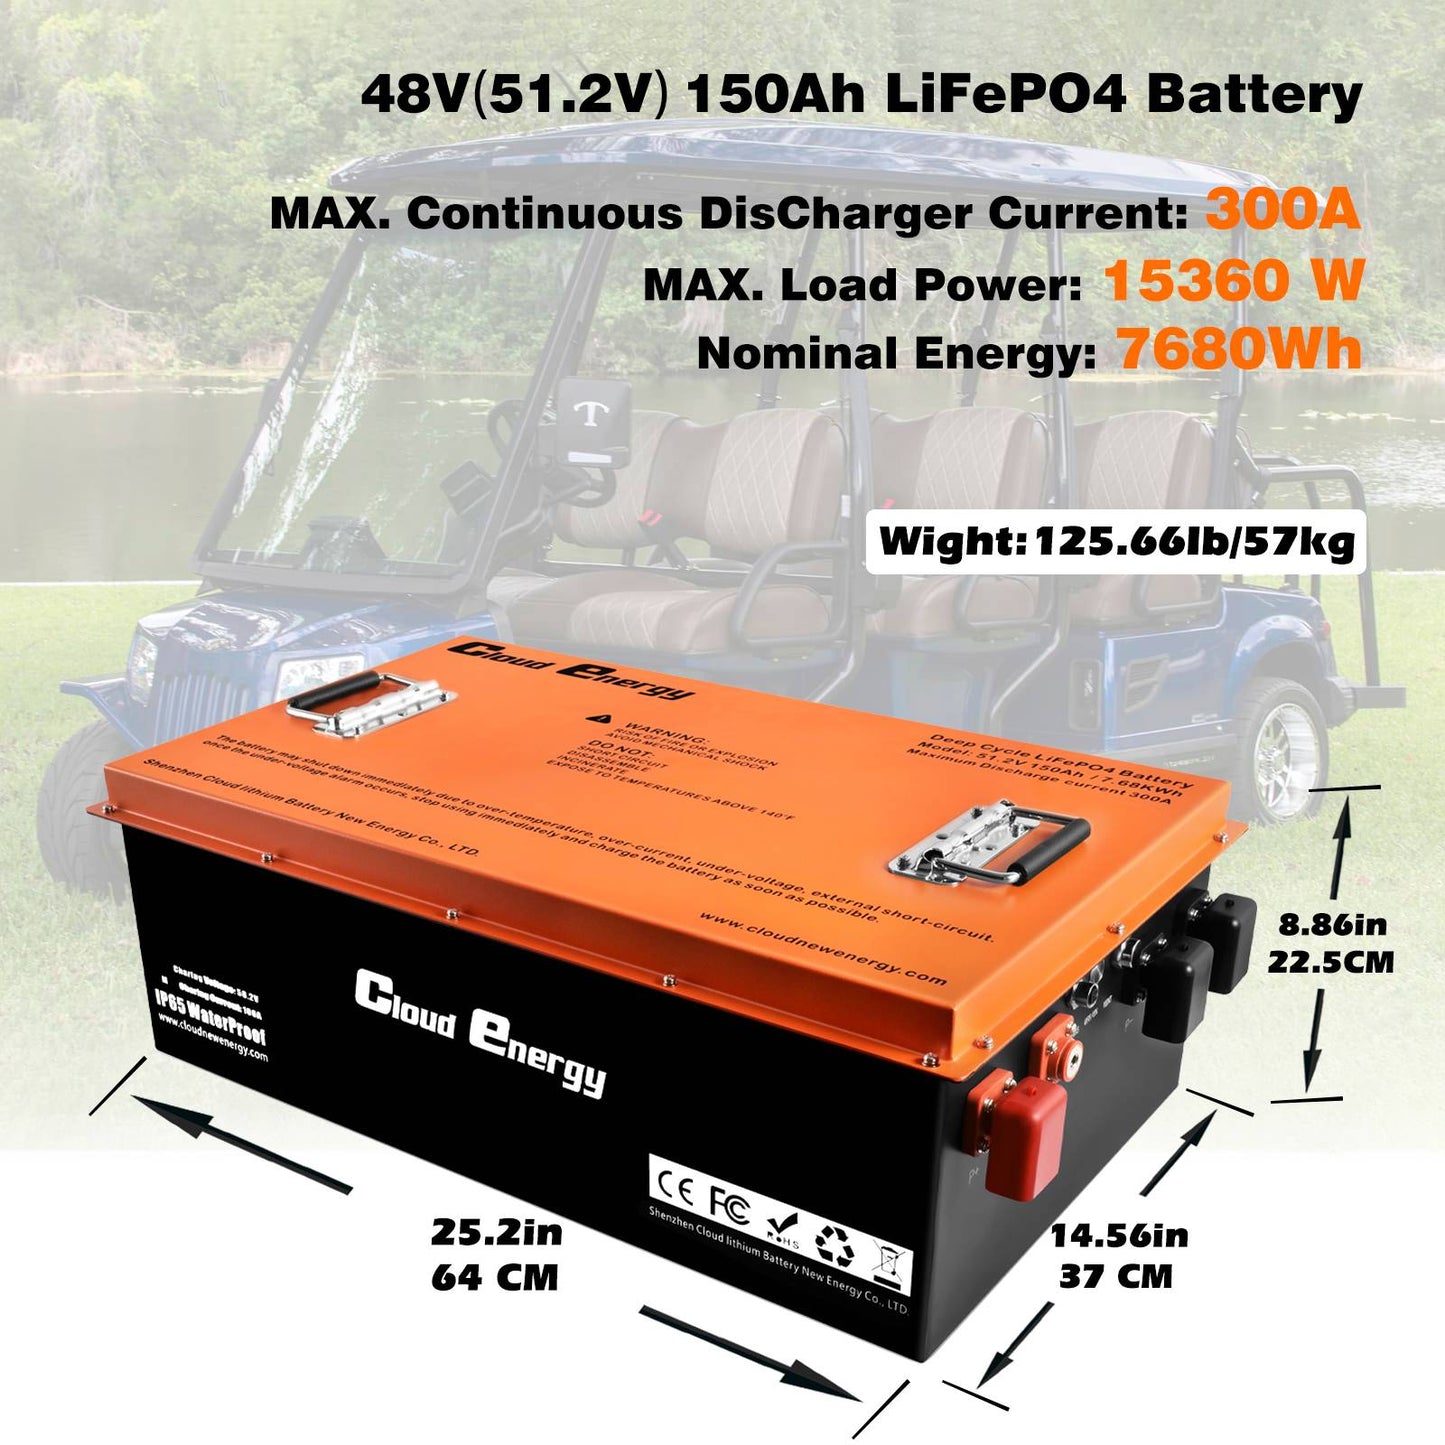 CloudEnergy 48V 150Ah Golf Carts LiFePO4 Battery, With 20A charger